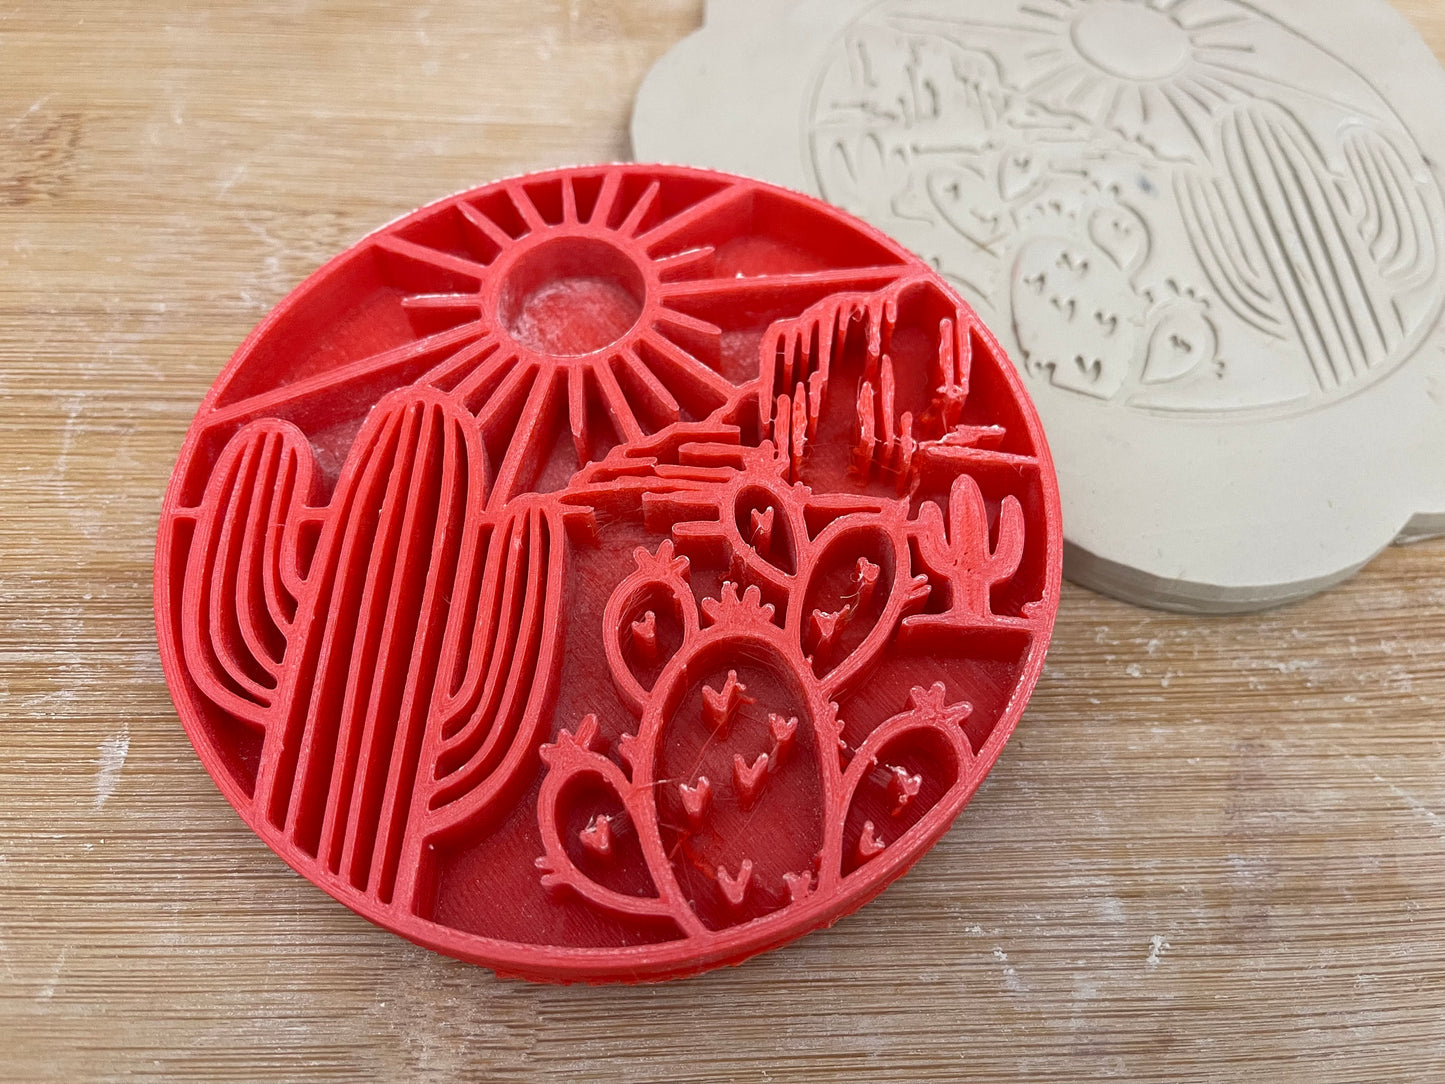 Cactus Desert Scene Pottery Stamp - plastic 3d printed, multiple sizes available